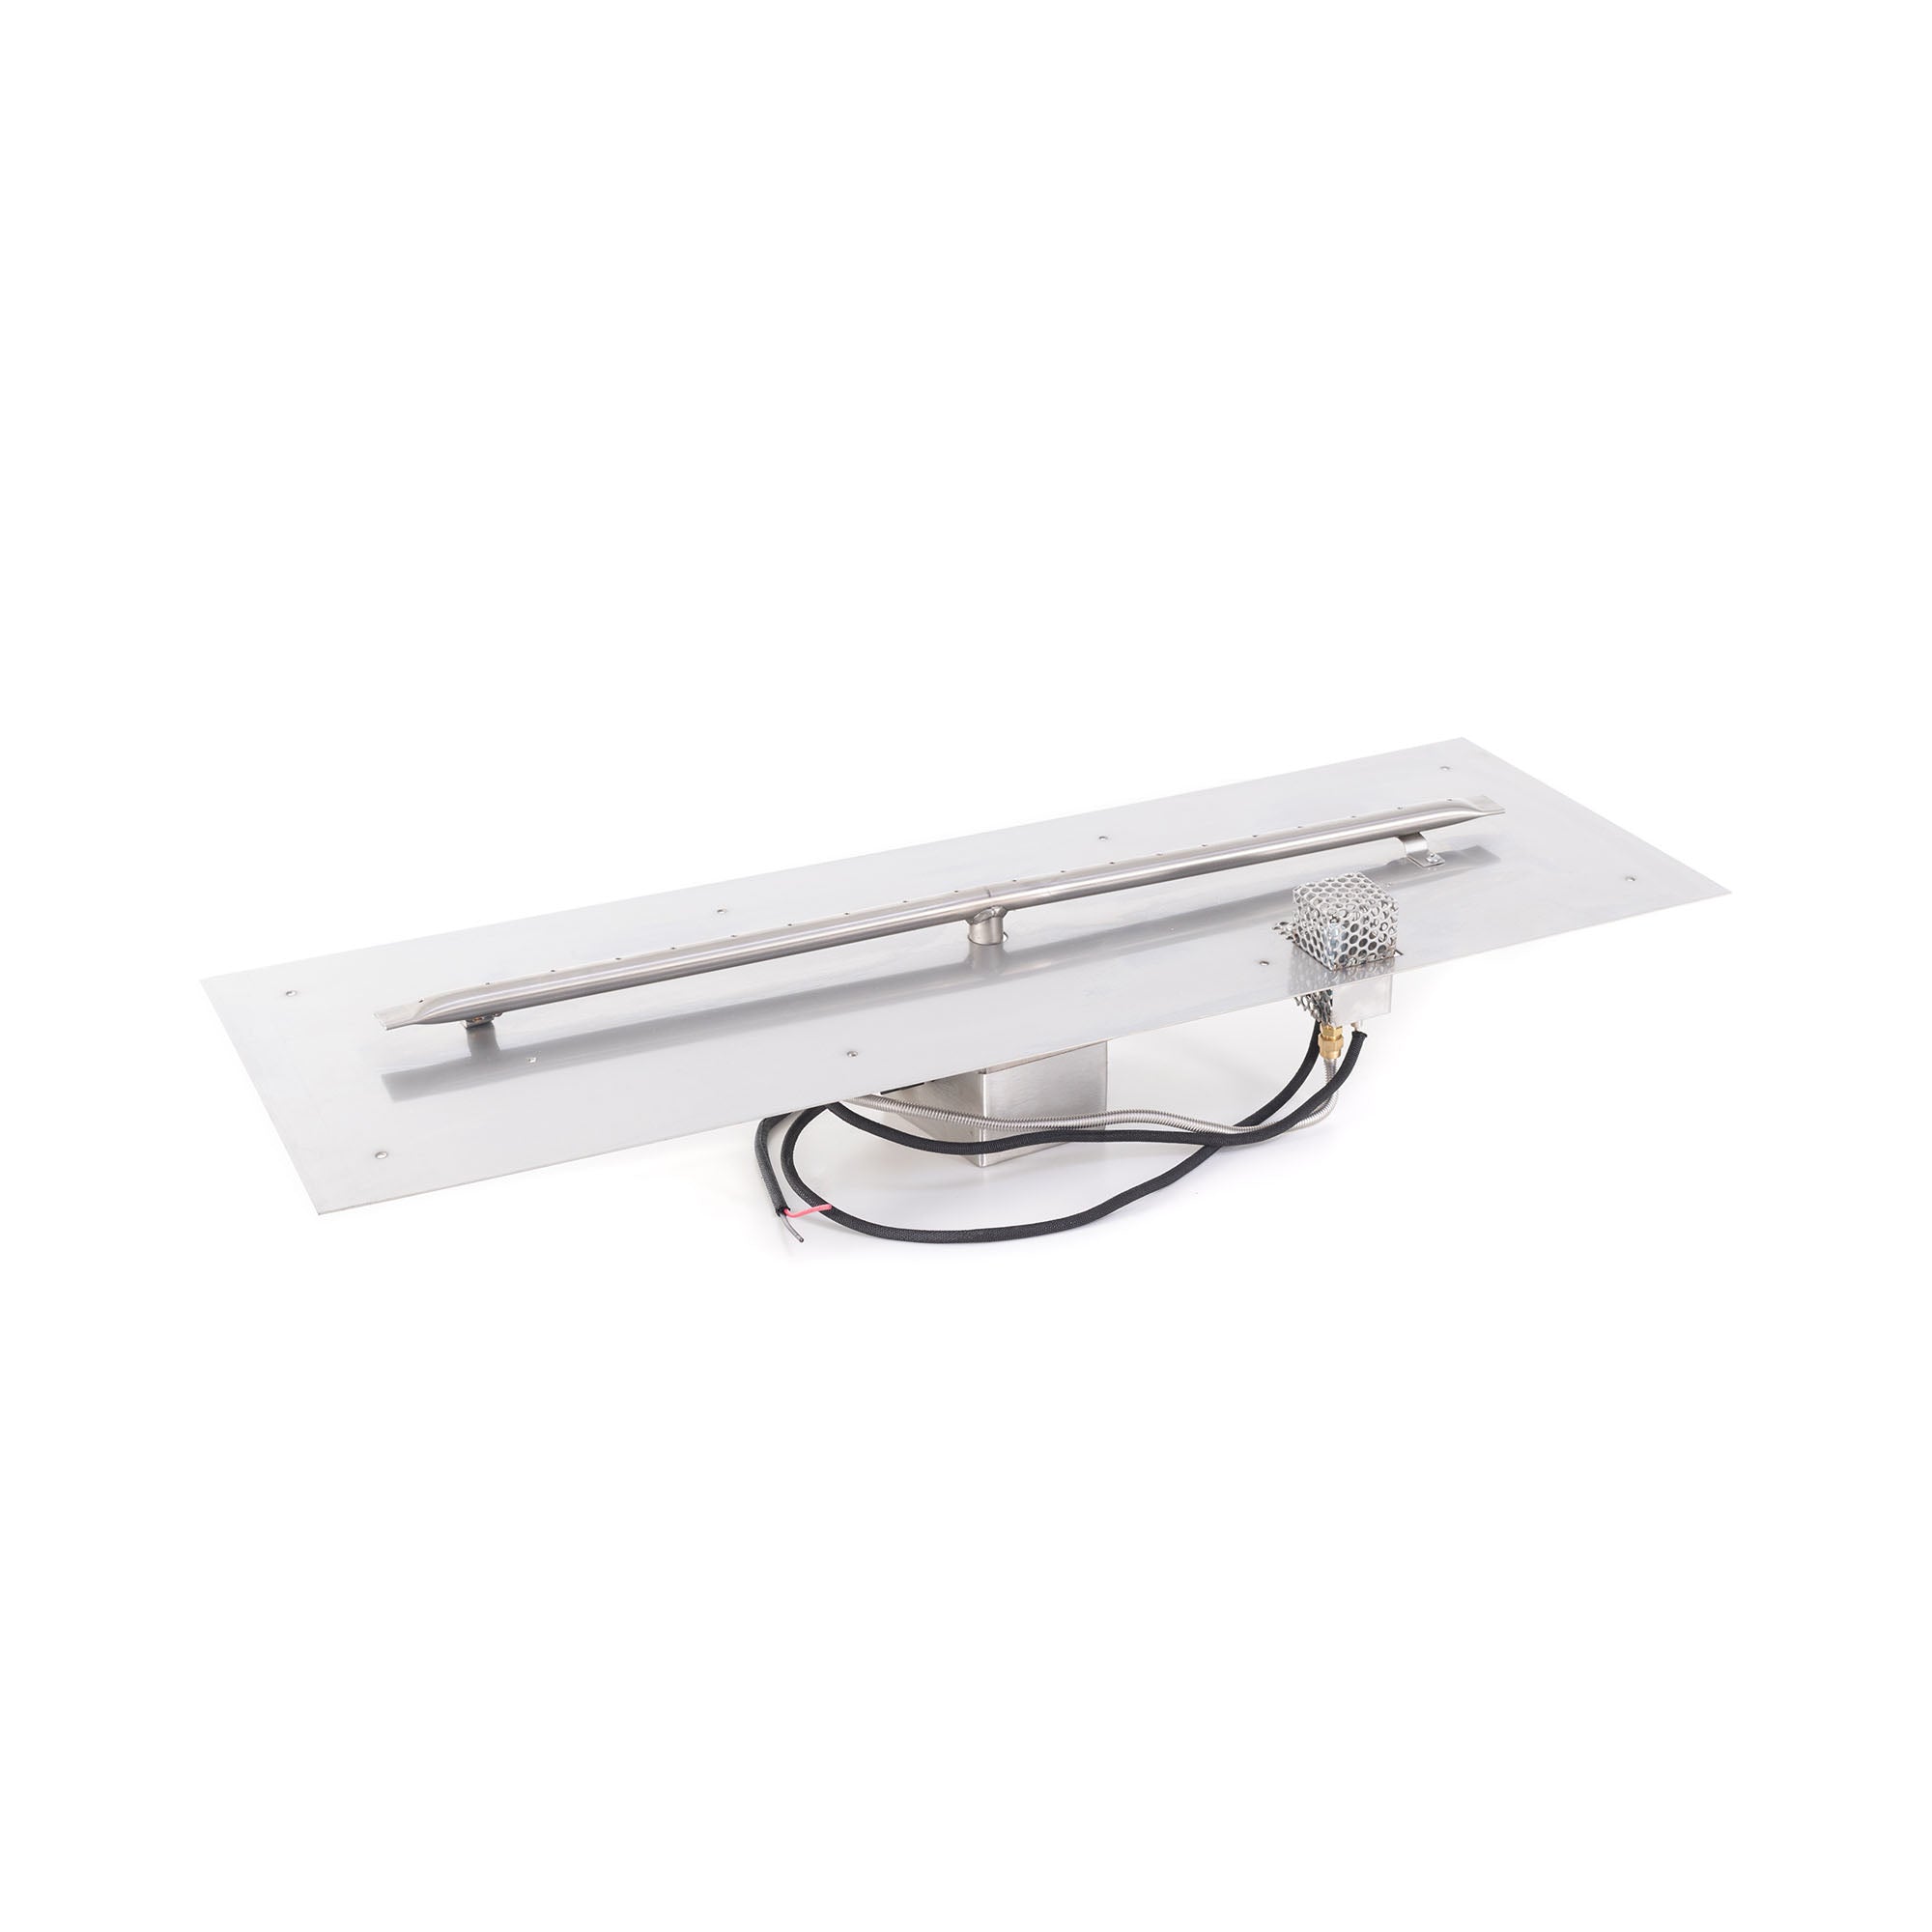 The Outdoor Plus - 36 Inch Rectangular Stainless Steel Flat Pan and 30 Inch Linear Burner - OPT-REFS836